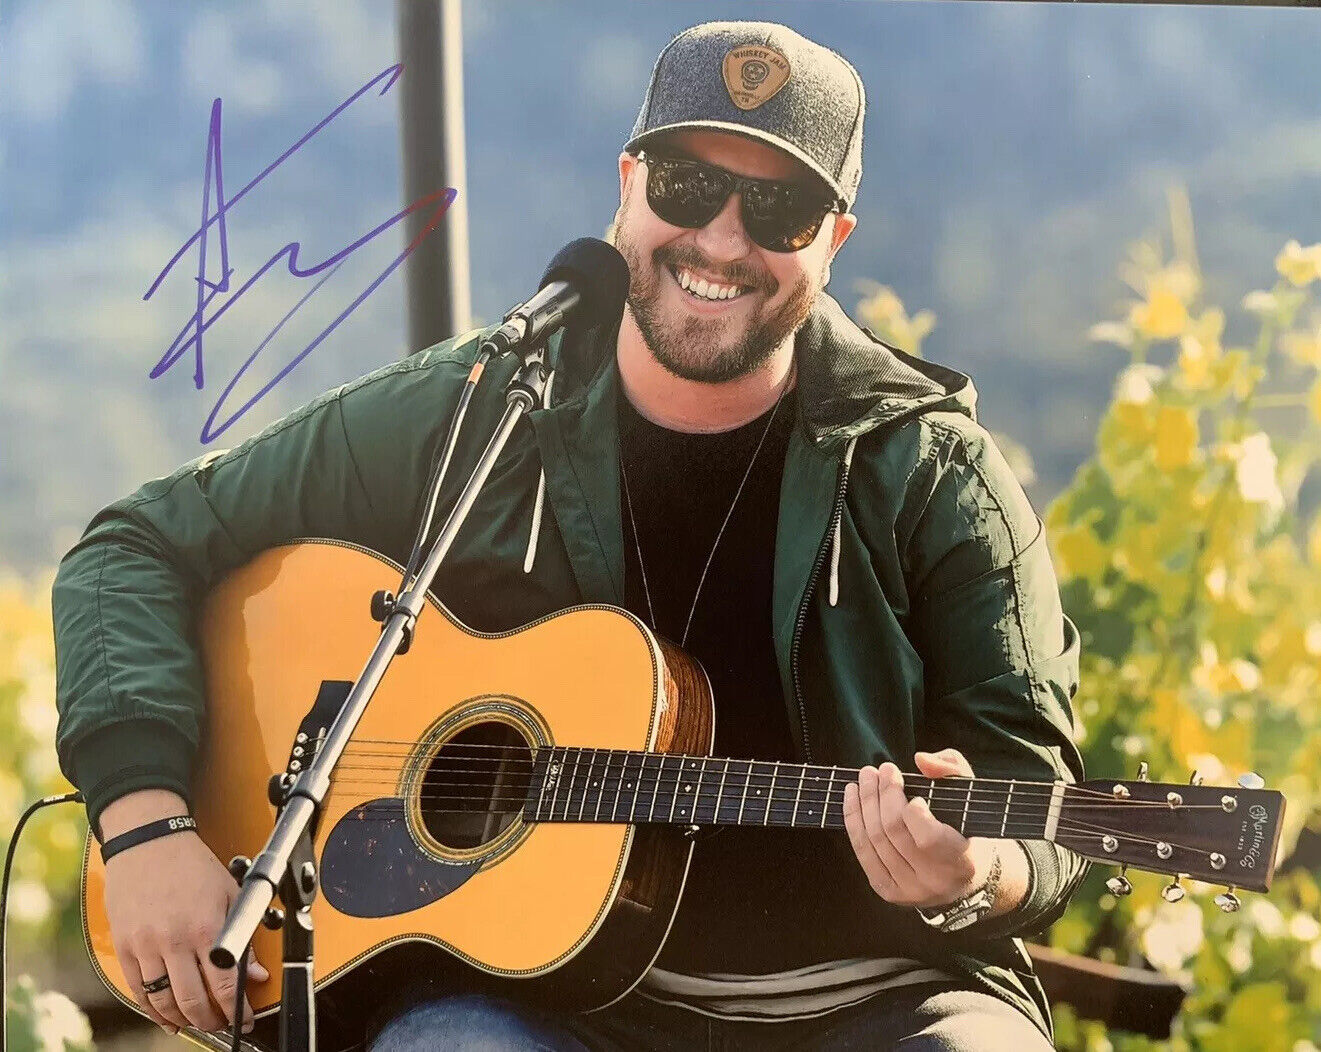 MITCHELL TENPENNY HAND SIGNED 8x10 Photo Poster painting AUTOGRAPH AUTHENTIC RARE COUNTRY SINGER